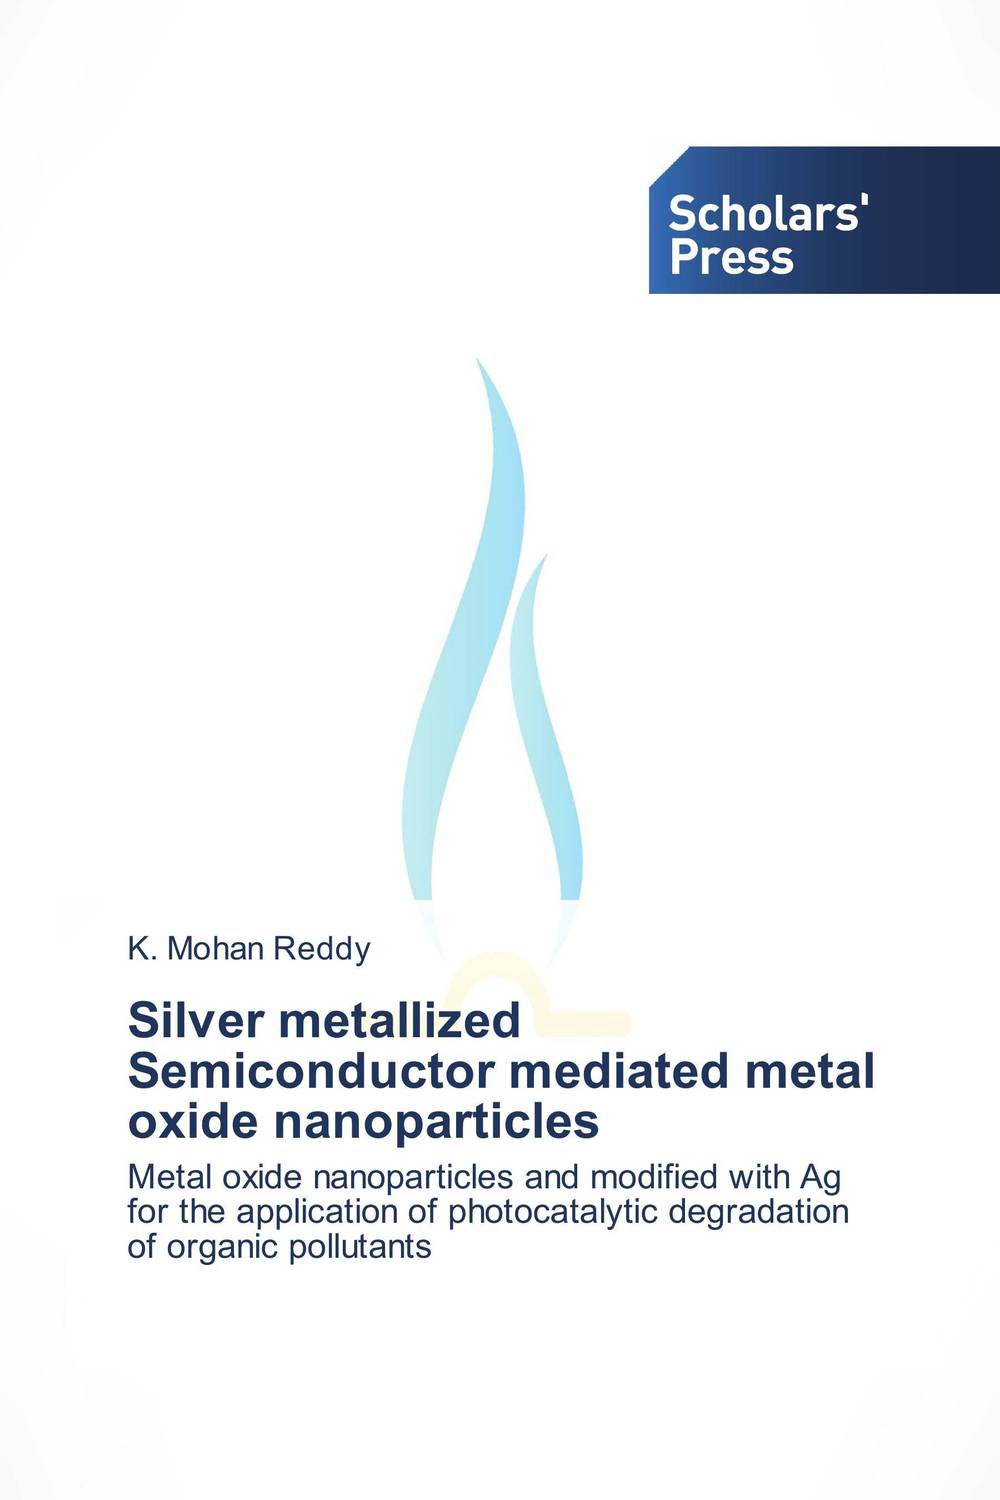 Silver metallized Semiconductor mediated metal oxide nanoparticles